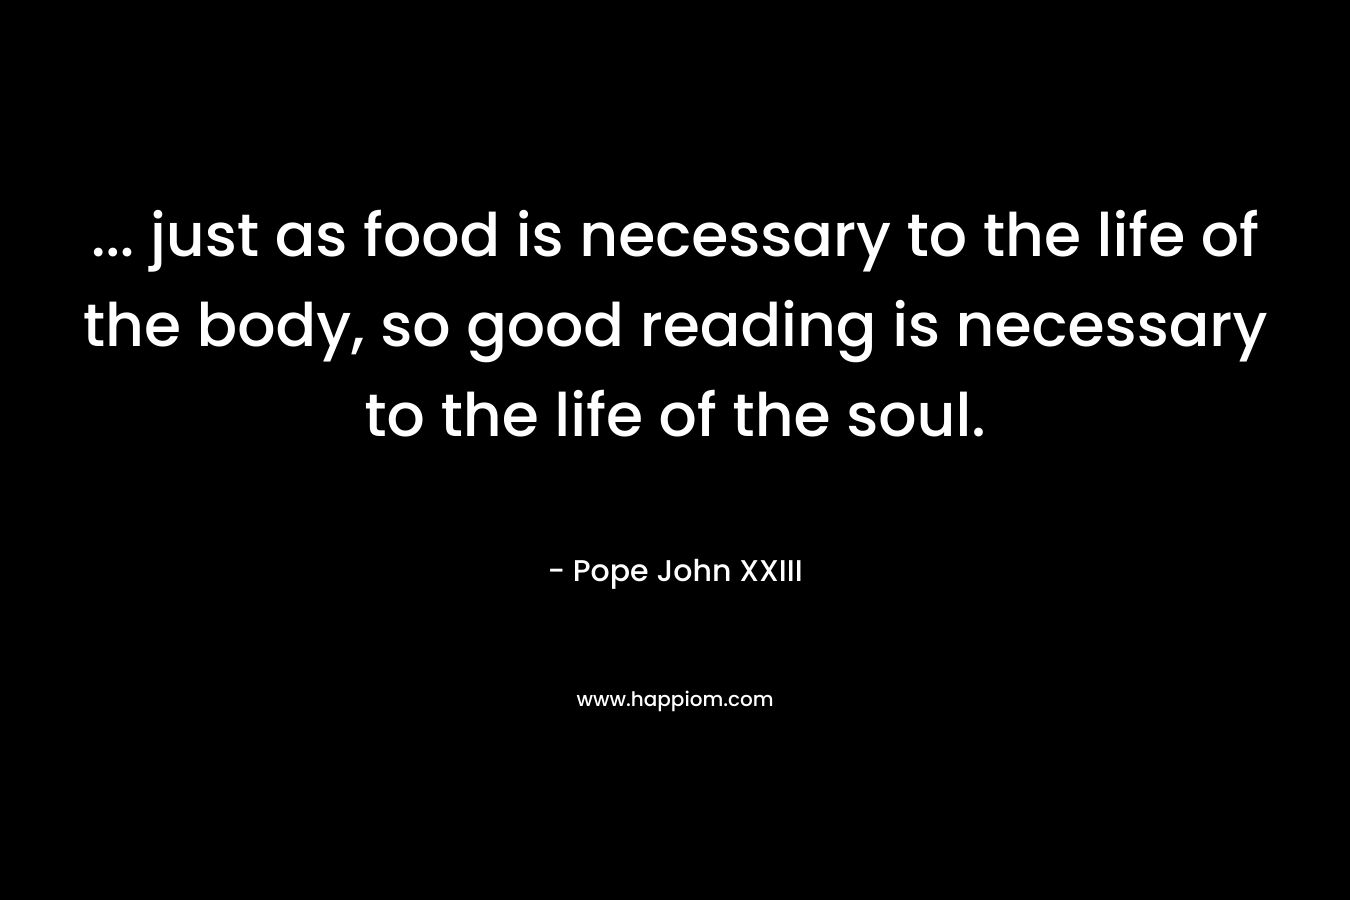 ... just as food is necessary to the life of the body, so good reading is necessary to the life of the soul.